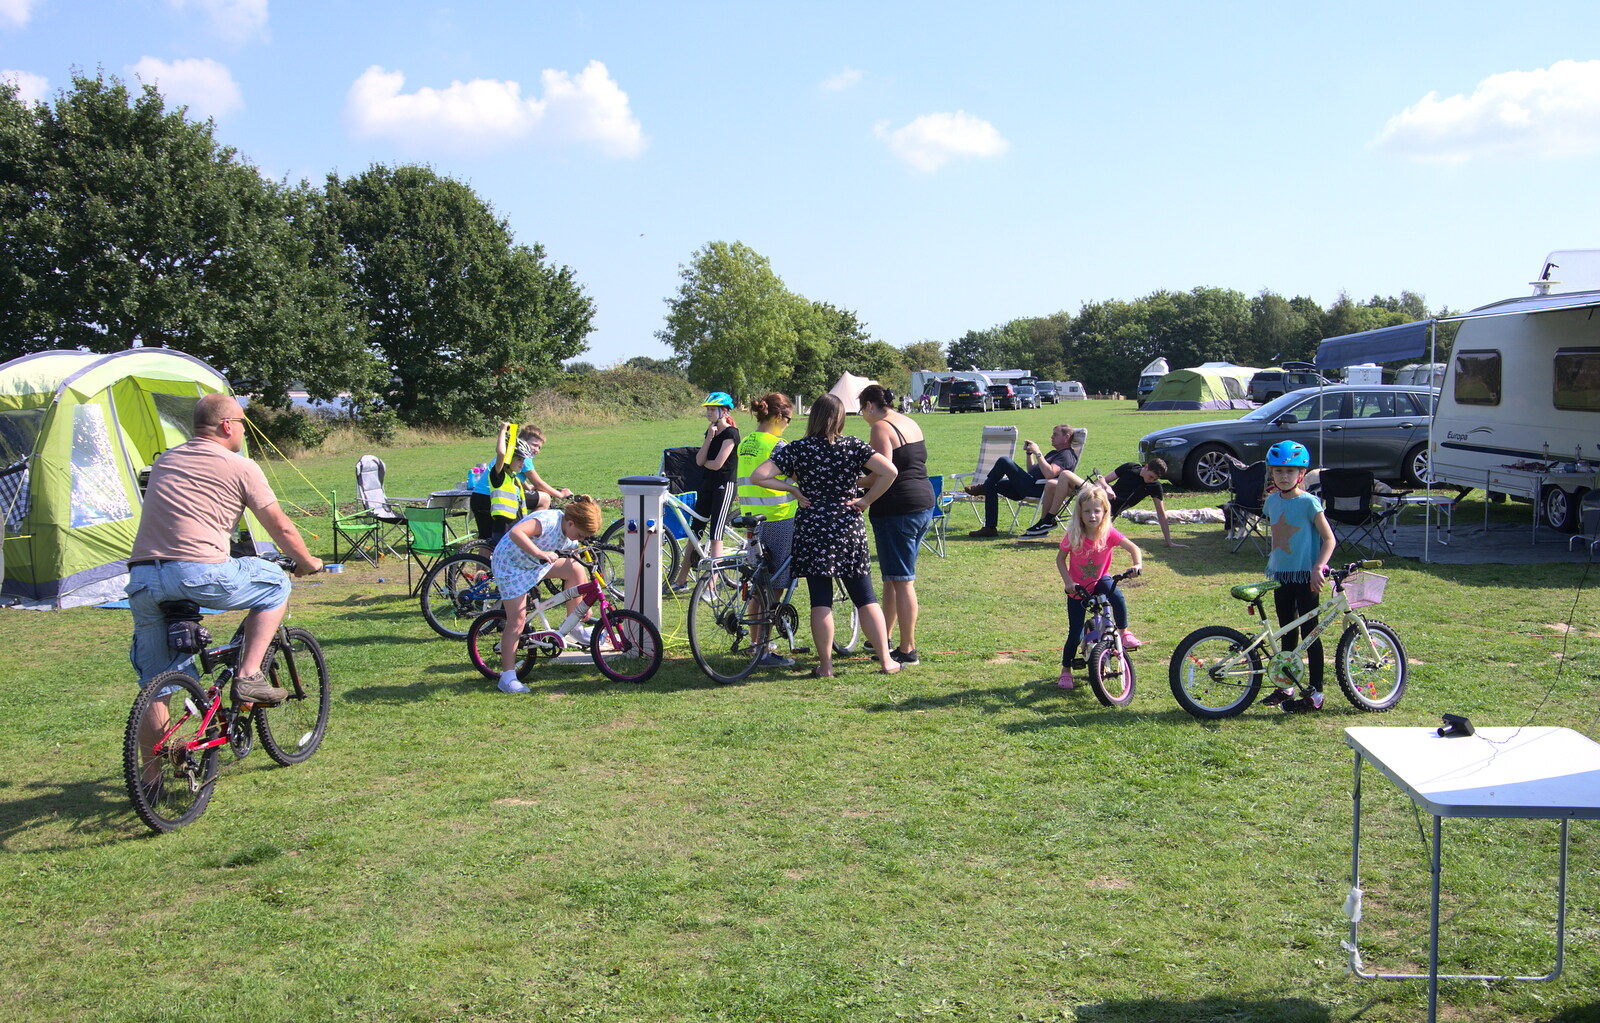 Everyone assembles for a bike ride from A Spot of Camping, Alton Water, Stutton, Suffolk - 1st September 2018